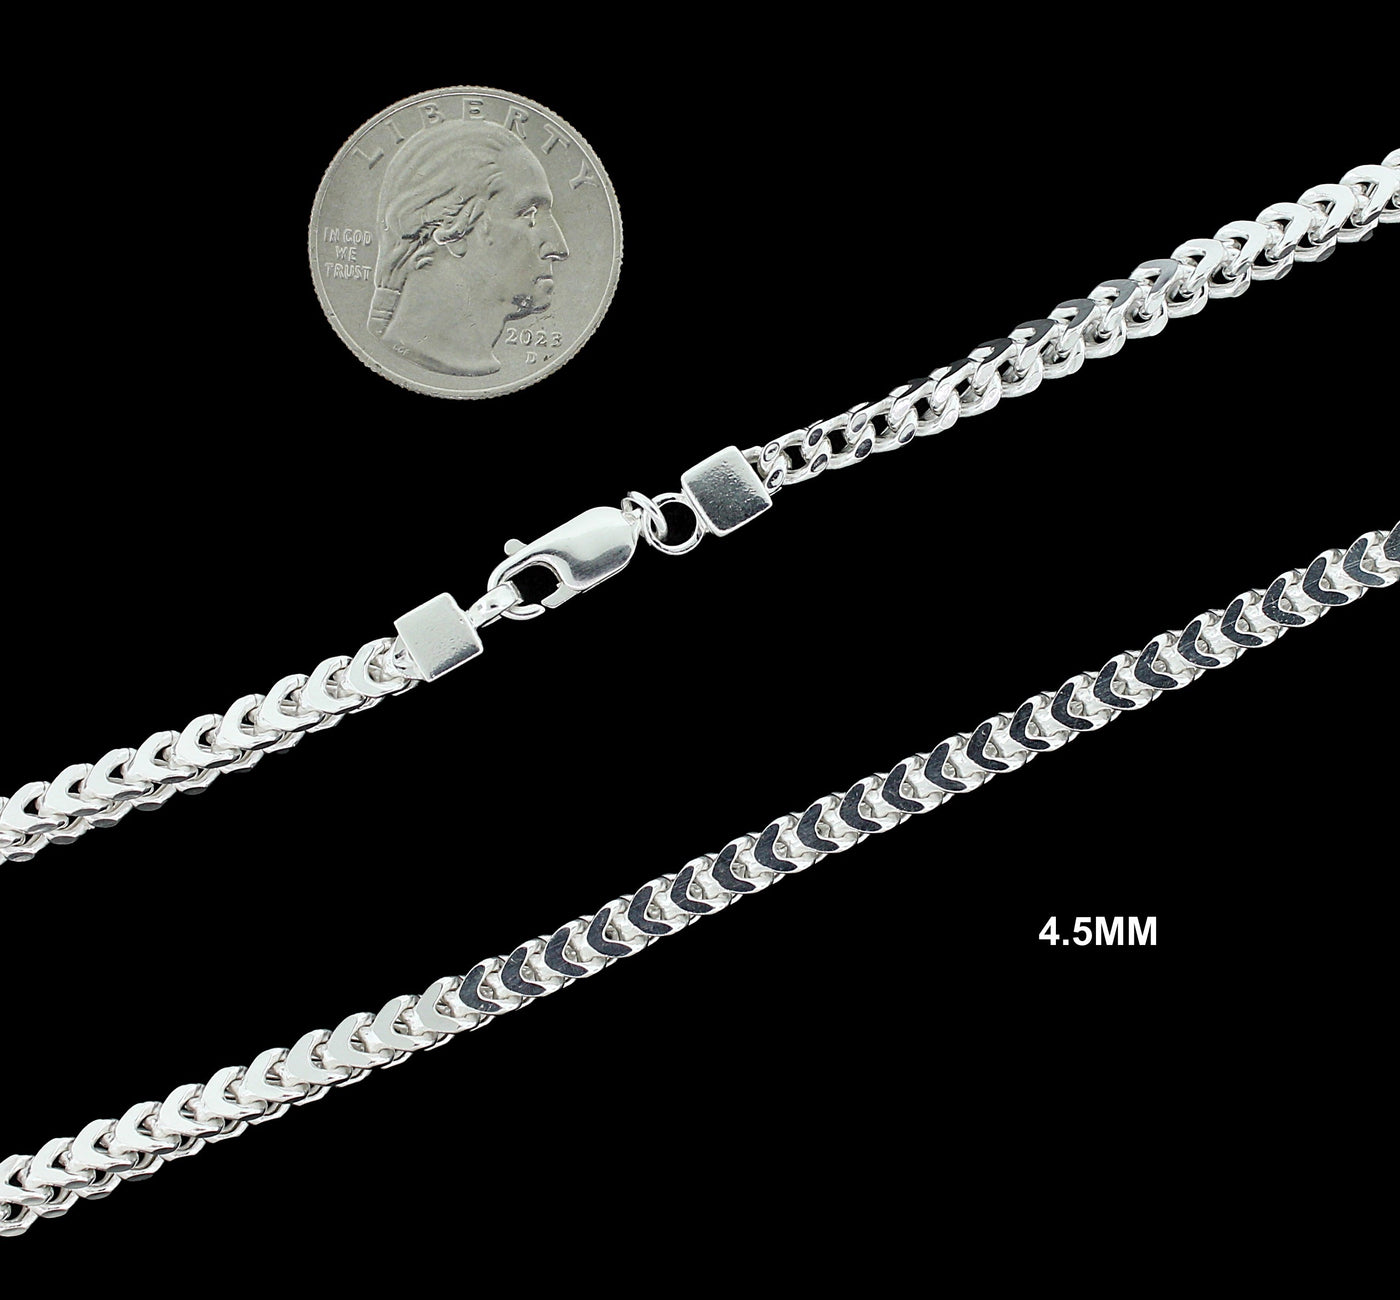 4.5MM Solid 925 Sterling Silver Franco Link Chain Necklace or Bracelet ITALY